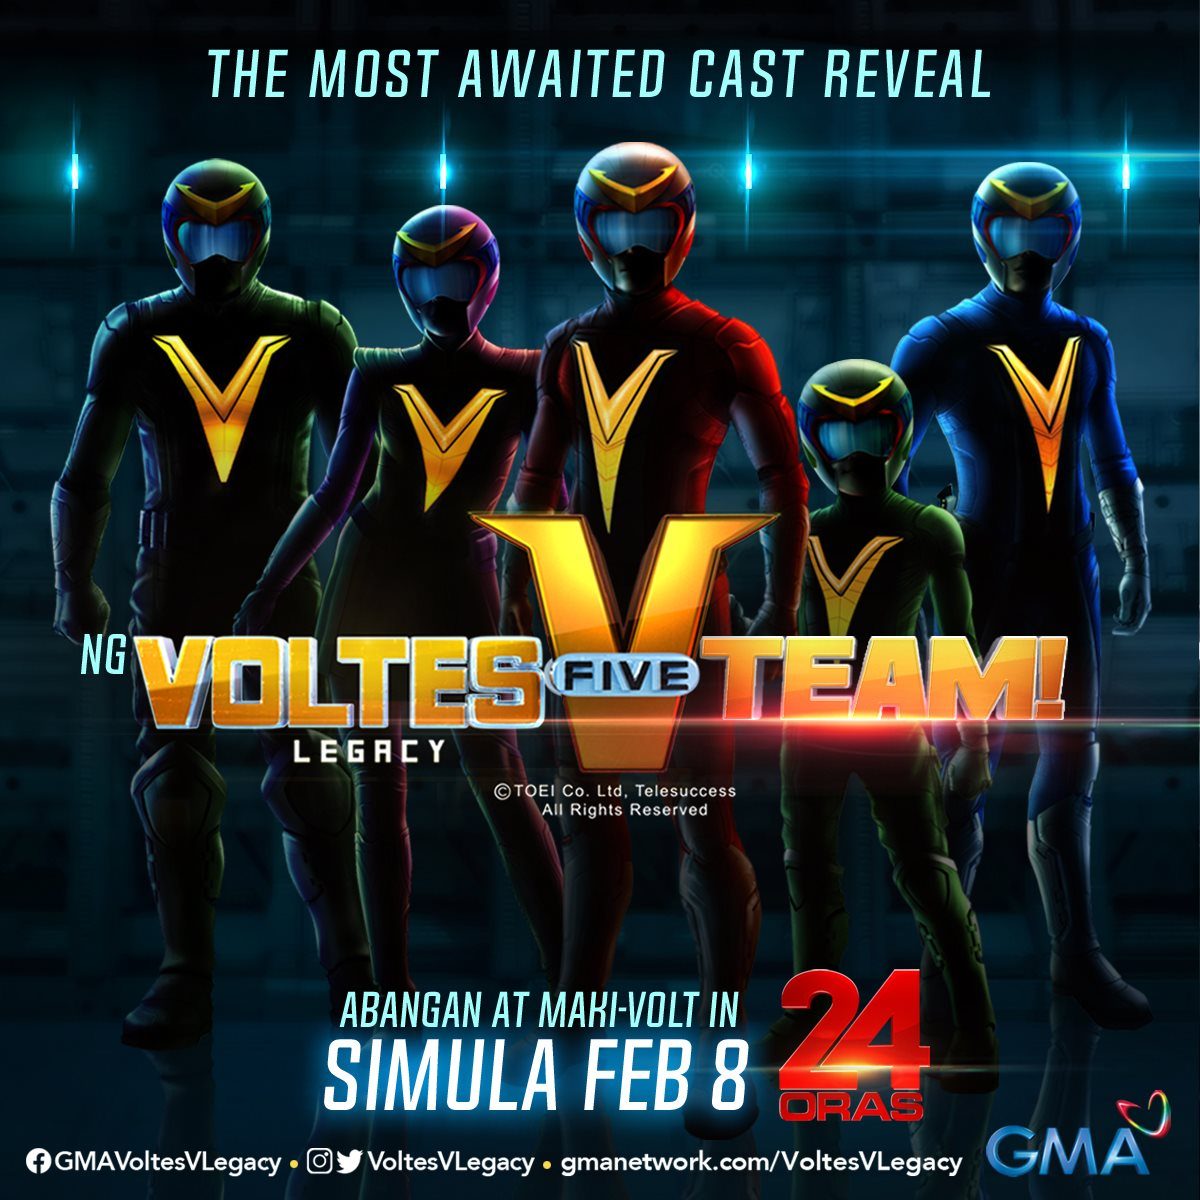 Meet the cast of GMA's 'Voltes V Legacy'